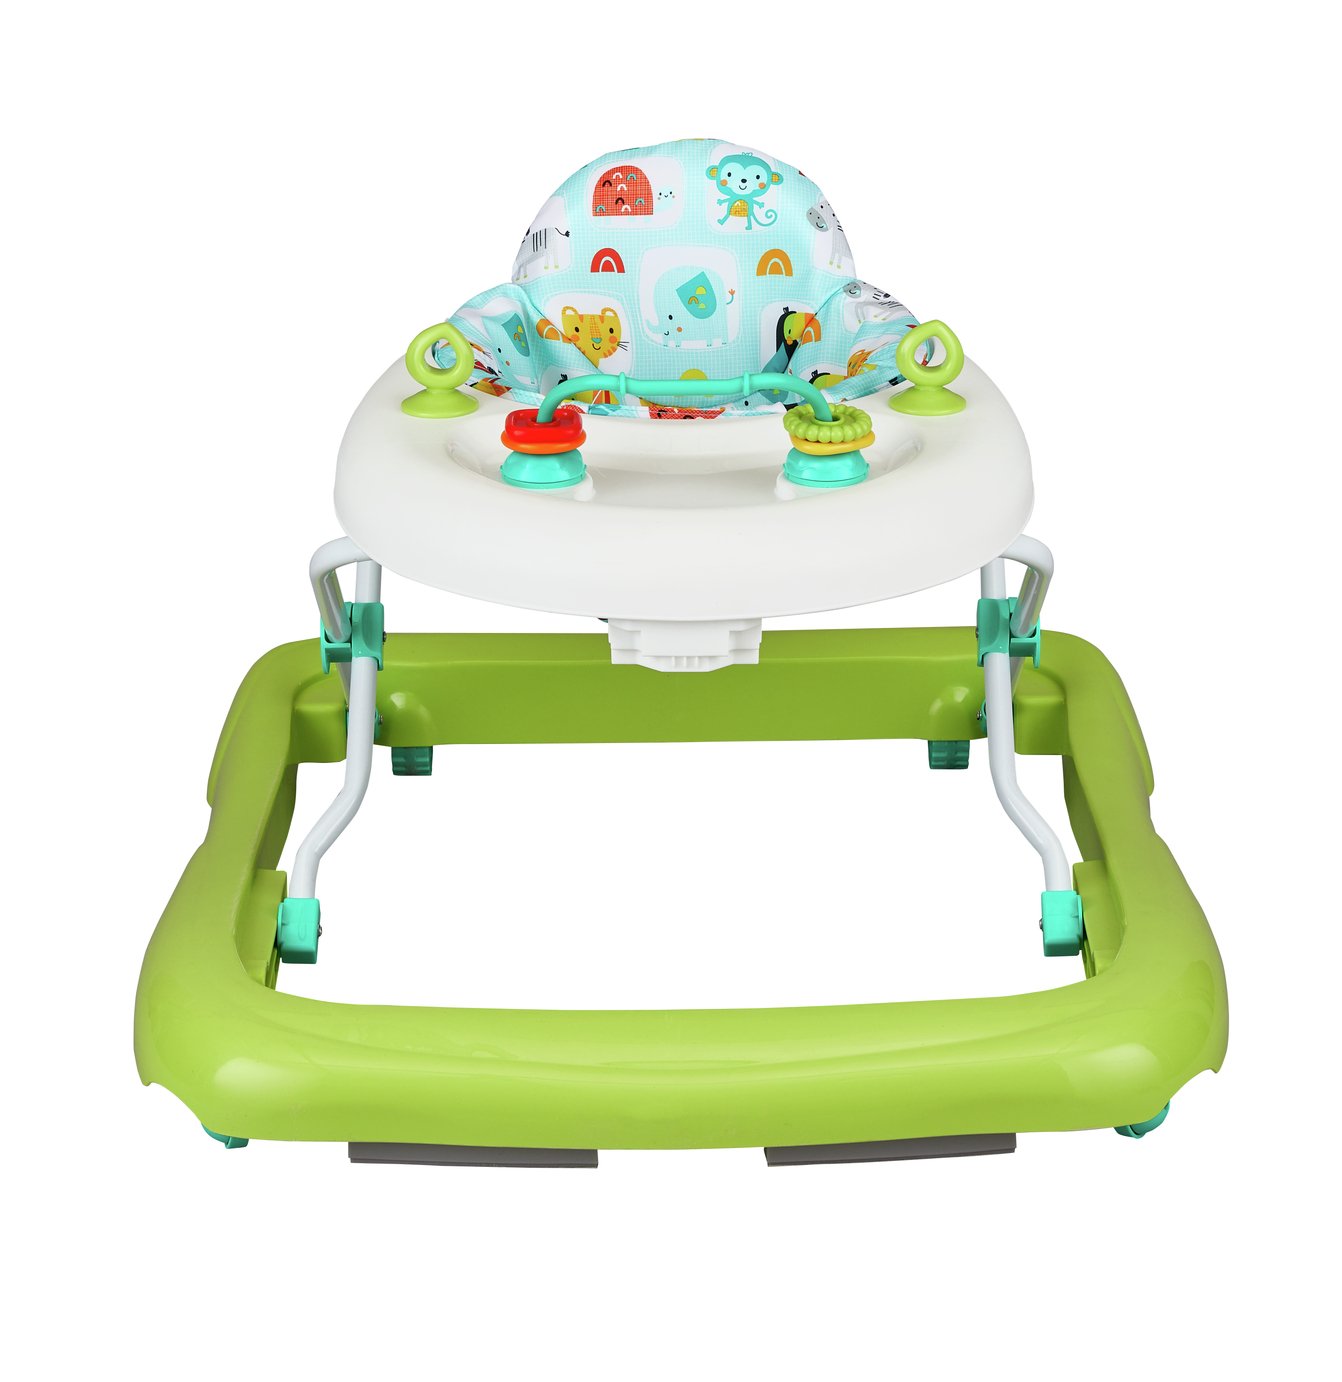 Chad Valley Jungle Deluxe Foldable Baby Walker Review